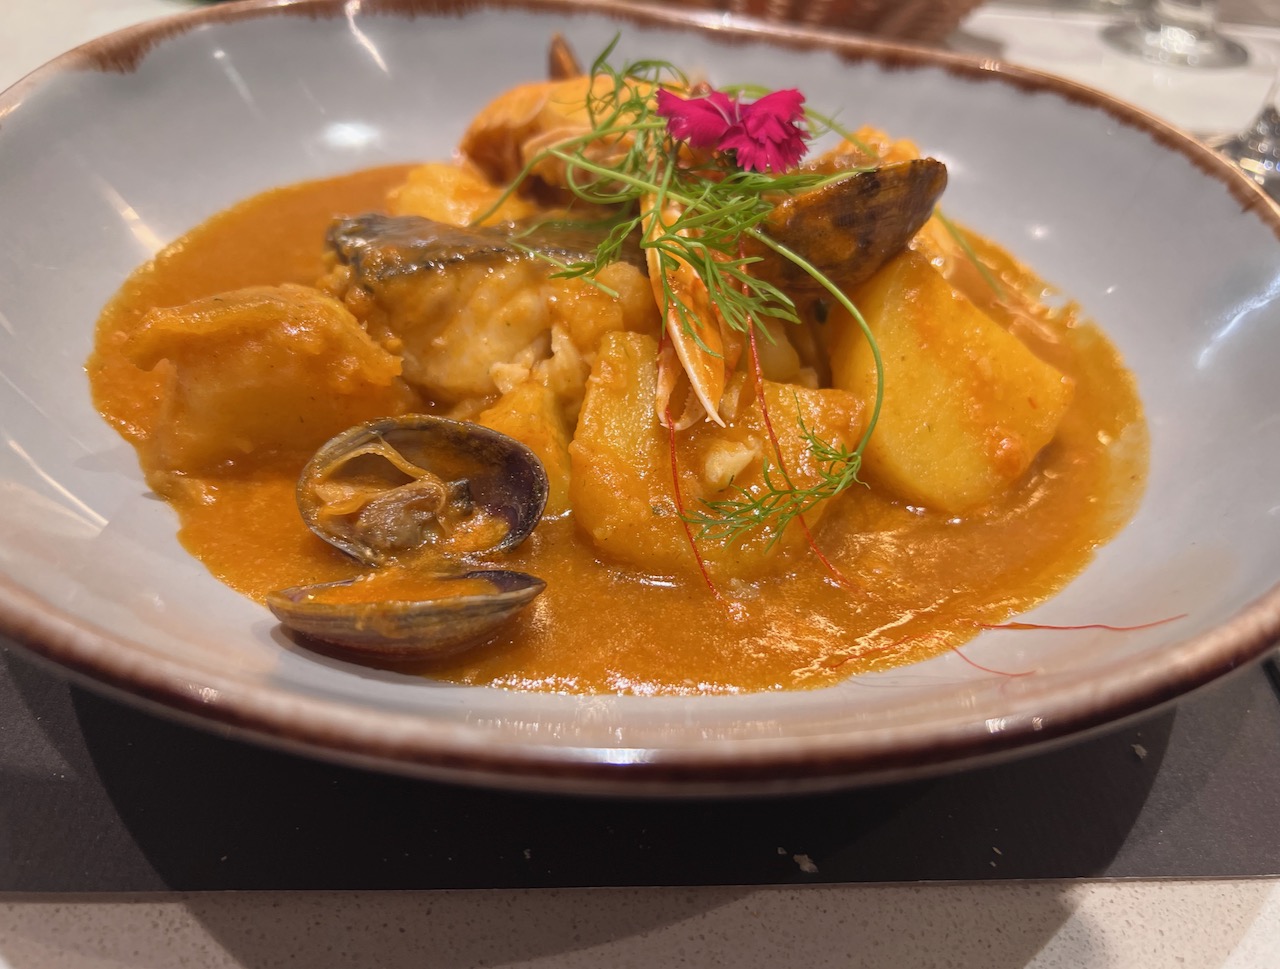 Fish stew and an oaked Valencian white wine